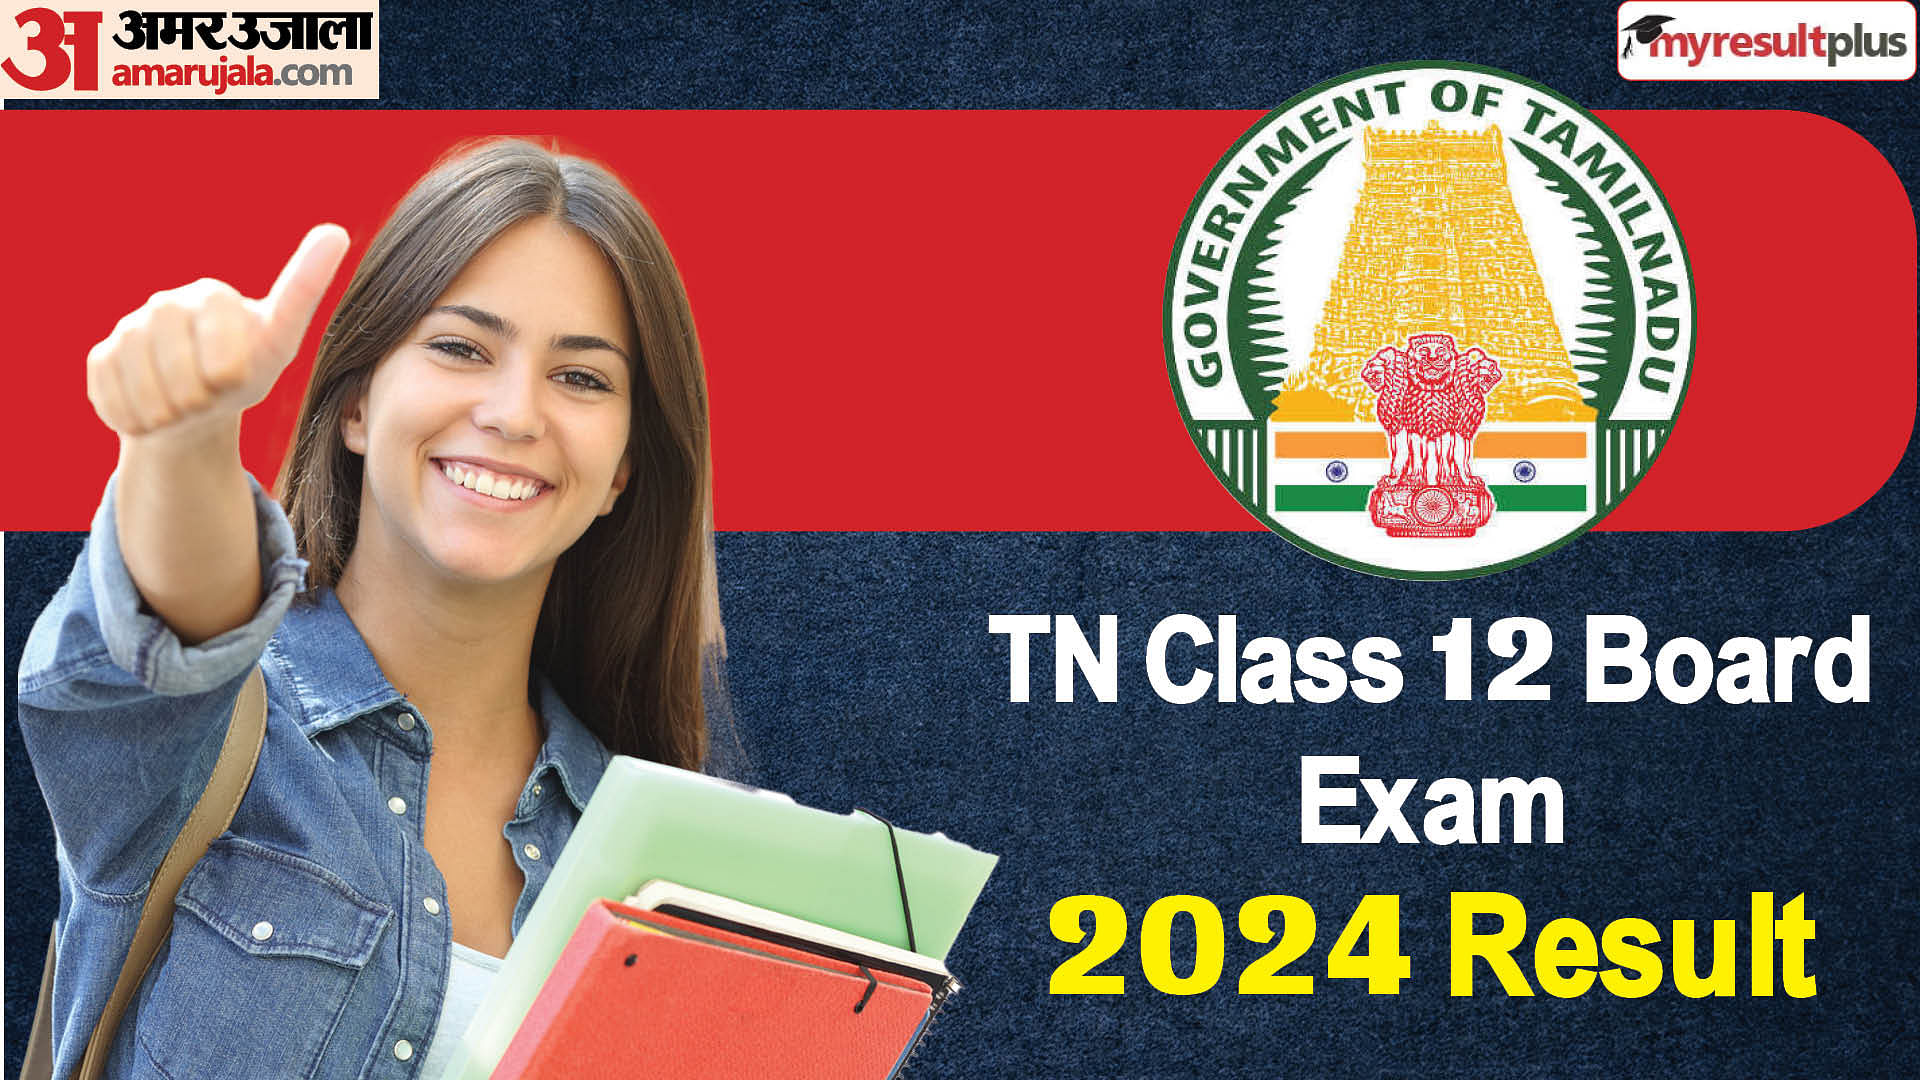 TN Class 12 Board exam 2024 Results out now, Check your results and more details here